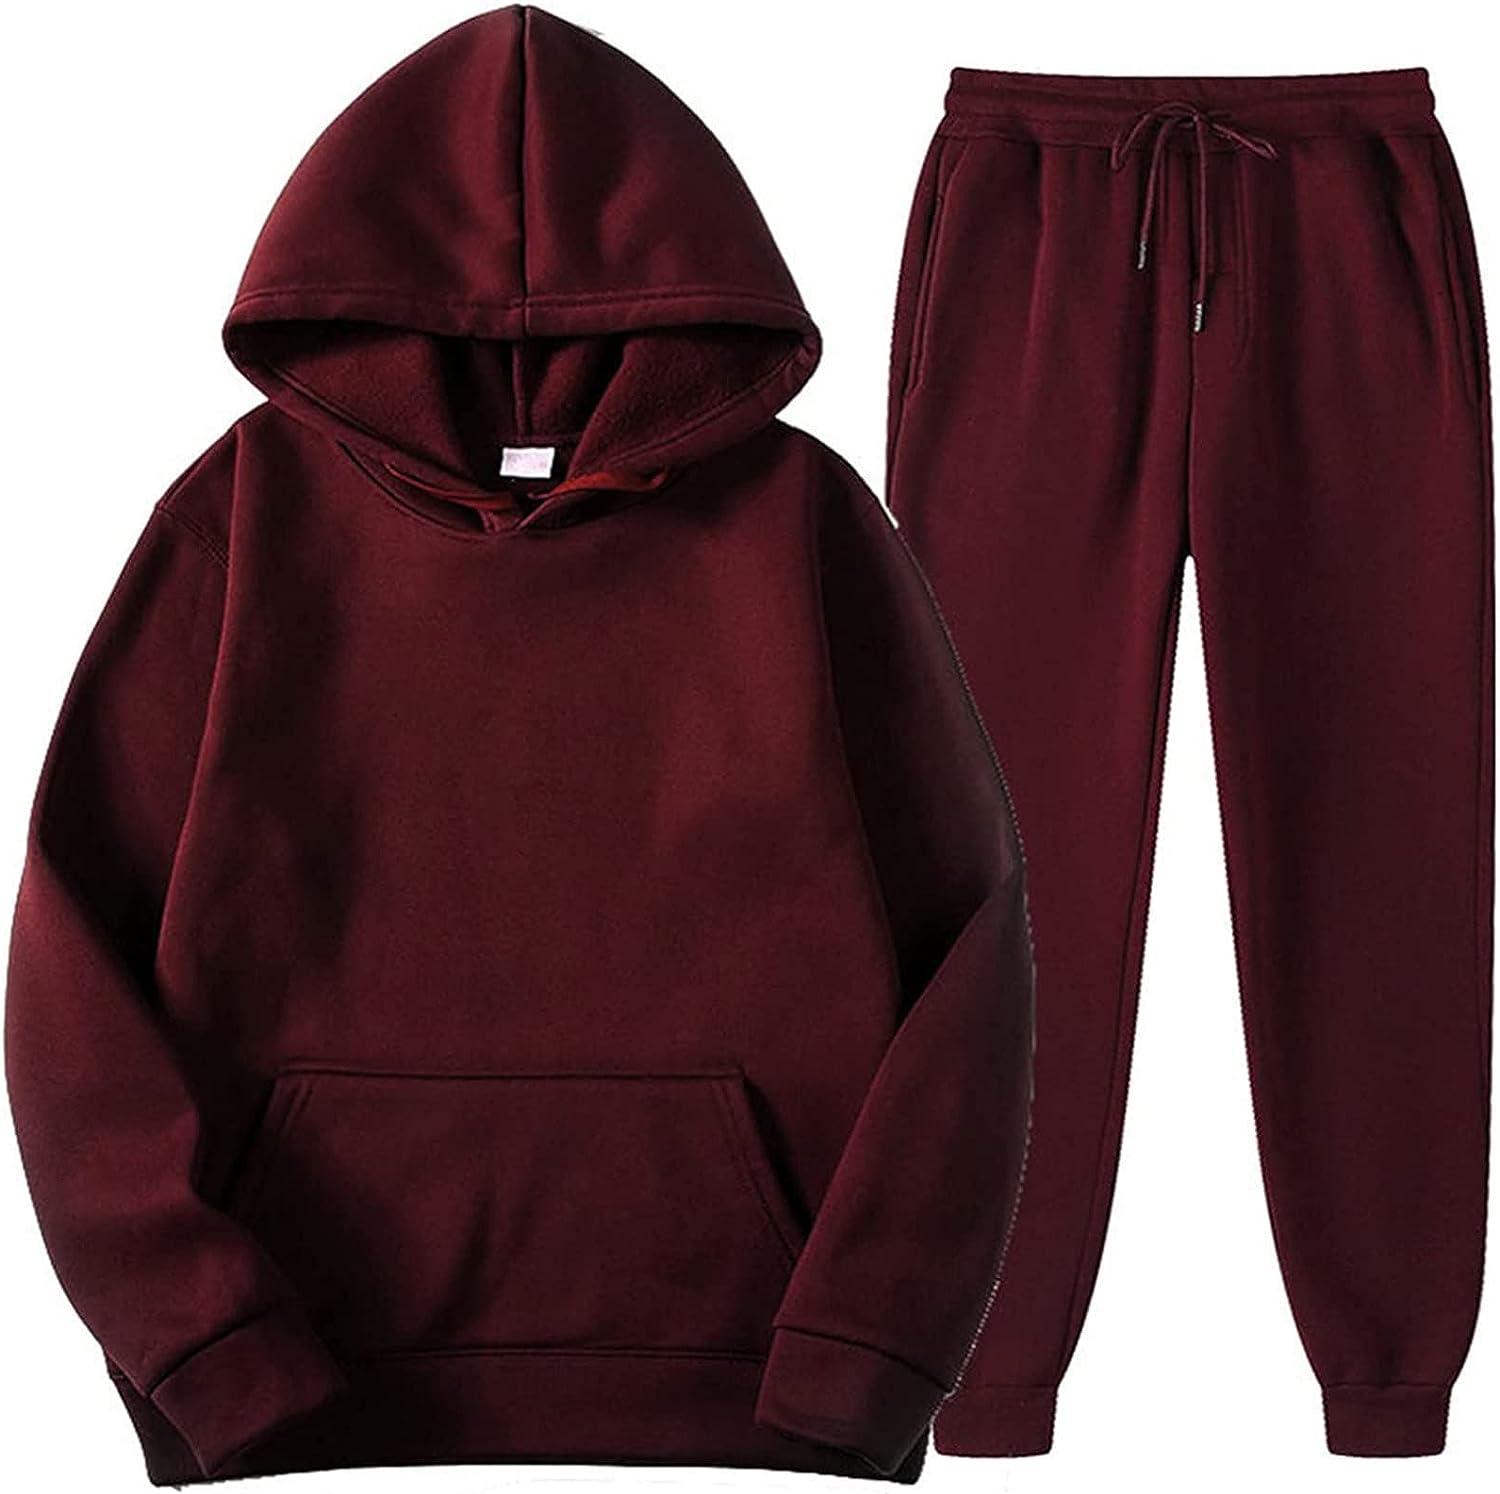 Tracksuit Men's Athletic Sweatsuits Casual Outfit for Men Fleece